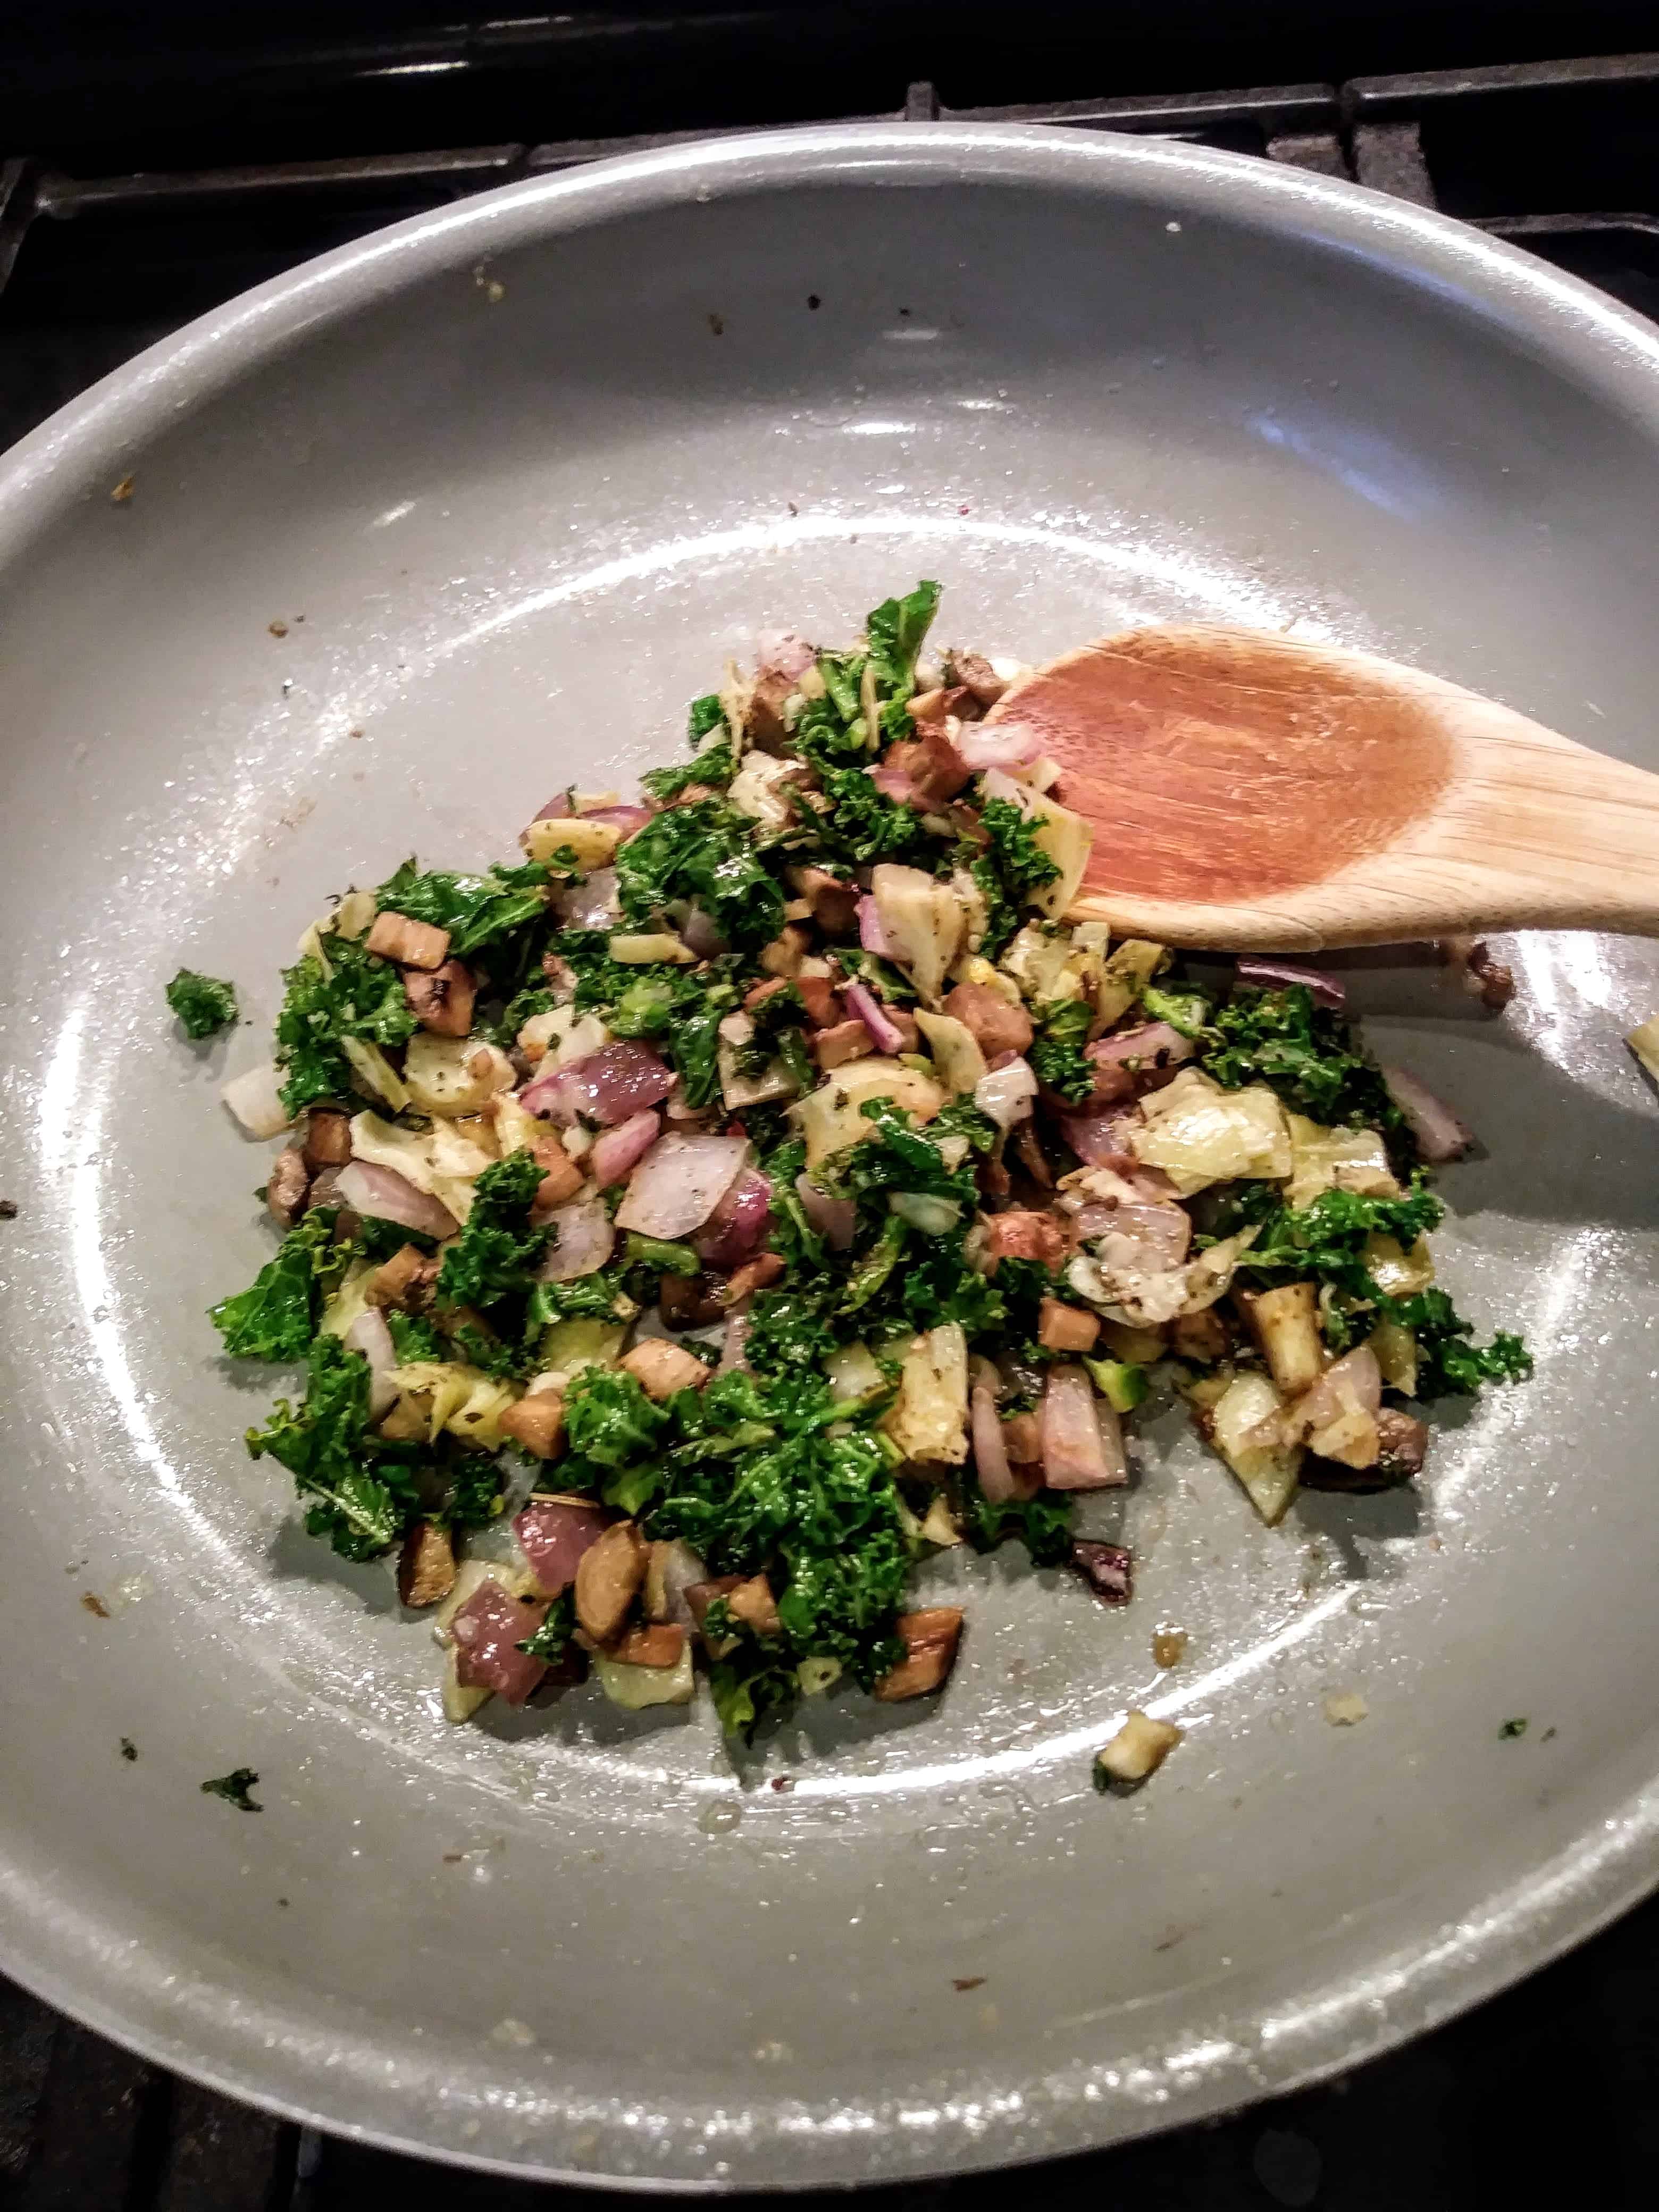 Onions, kale, artichokes, and mushroom stems cooking in pan.